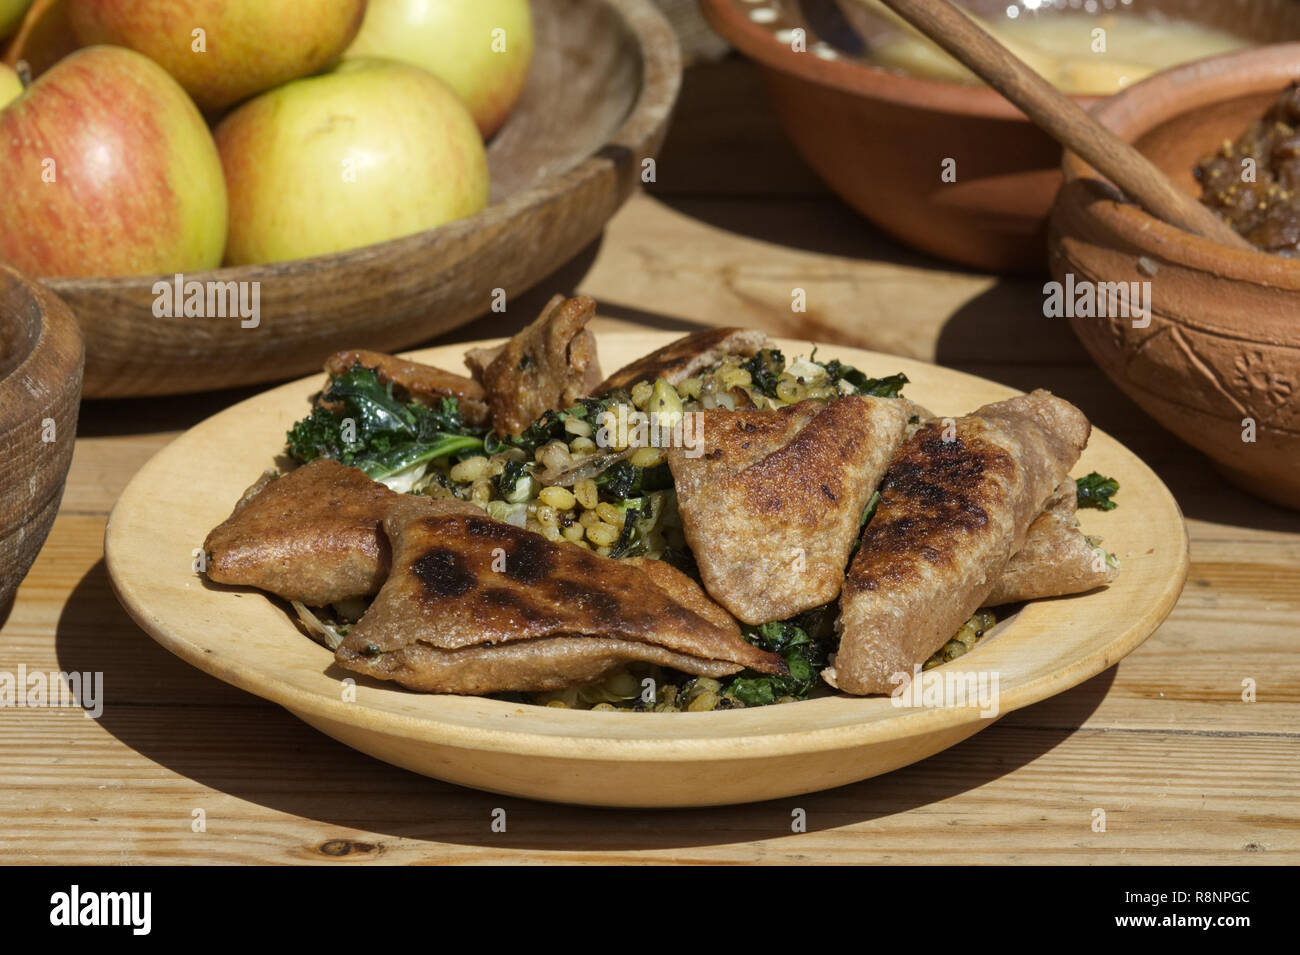 Medieval banquet foods Stock Photo